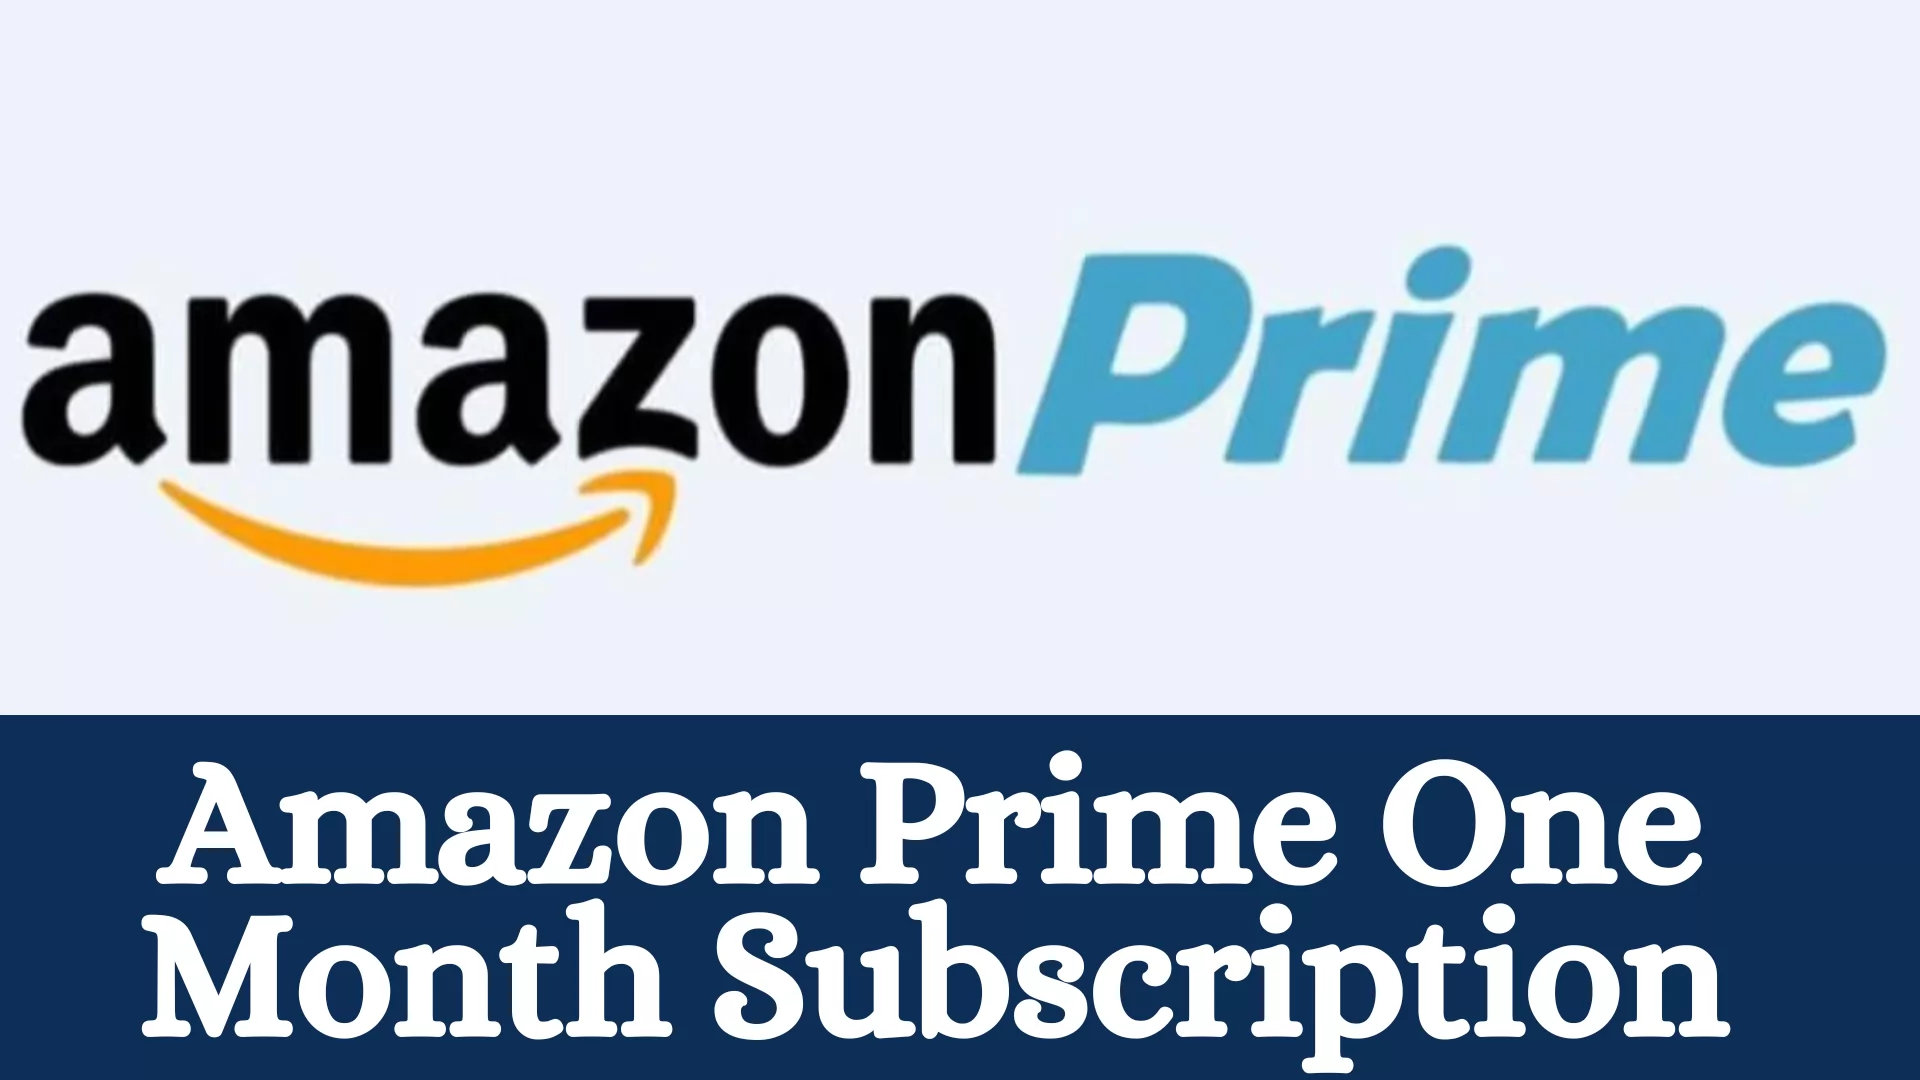 How to Get Amazon Prime Membership for 1 Month